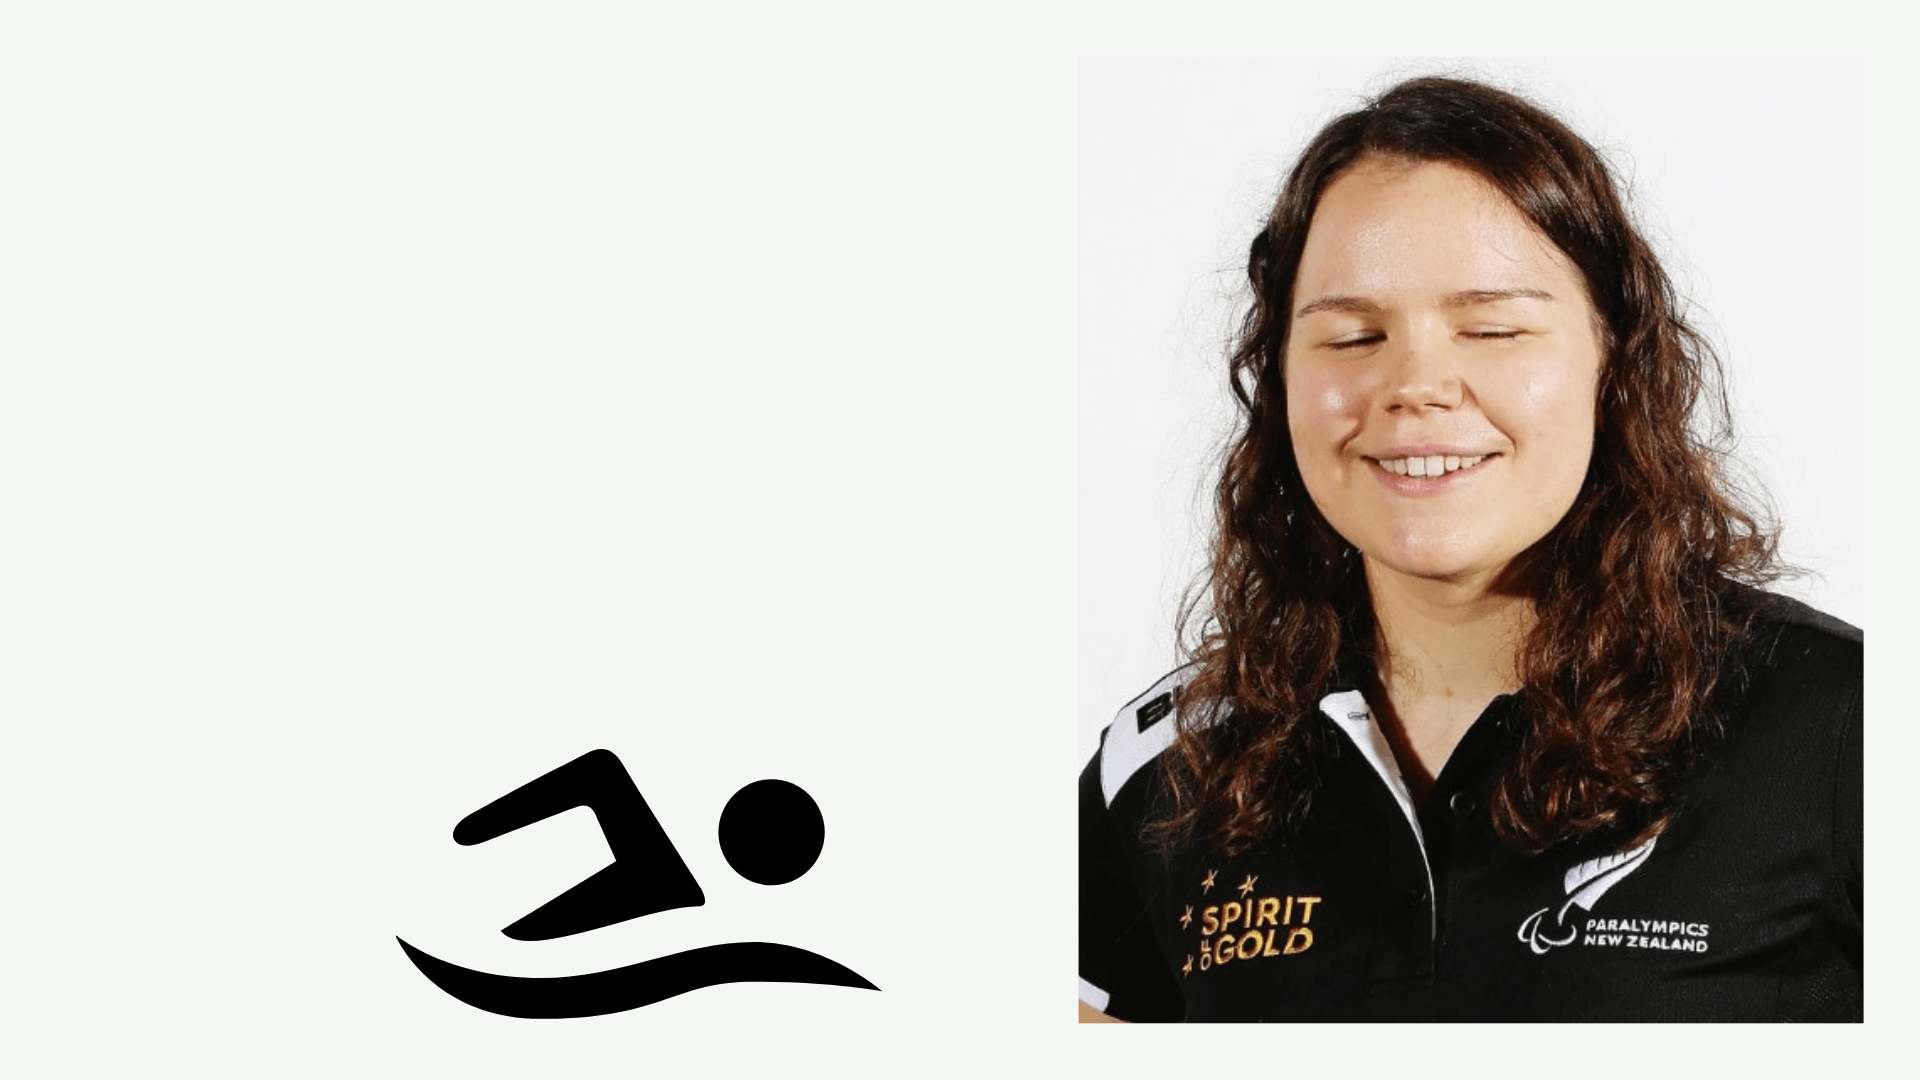 Mary Fisher wears her Paralympics NZ shirt and smiles.